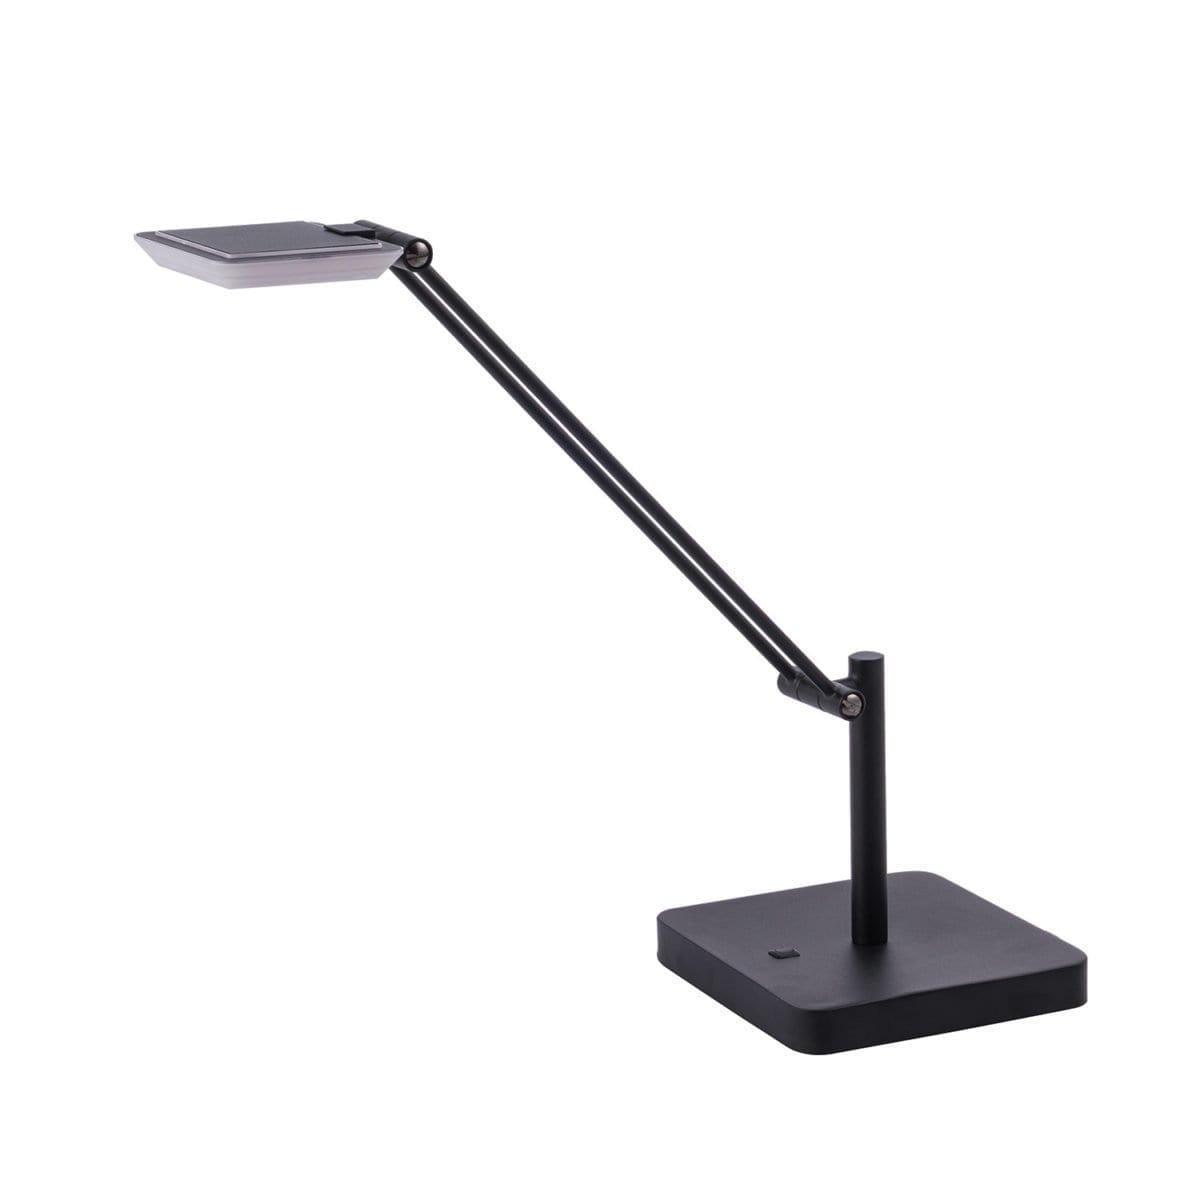 148 PTL 5020 BLK
LED Table Lamp
Available in Black or Satin Nickle
Regular Price $226.99
Sale Price $158.99